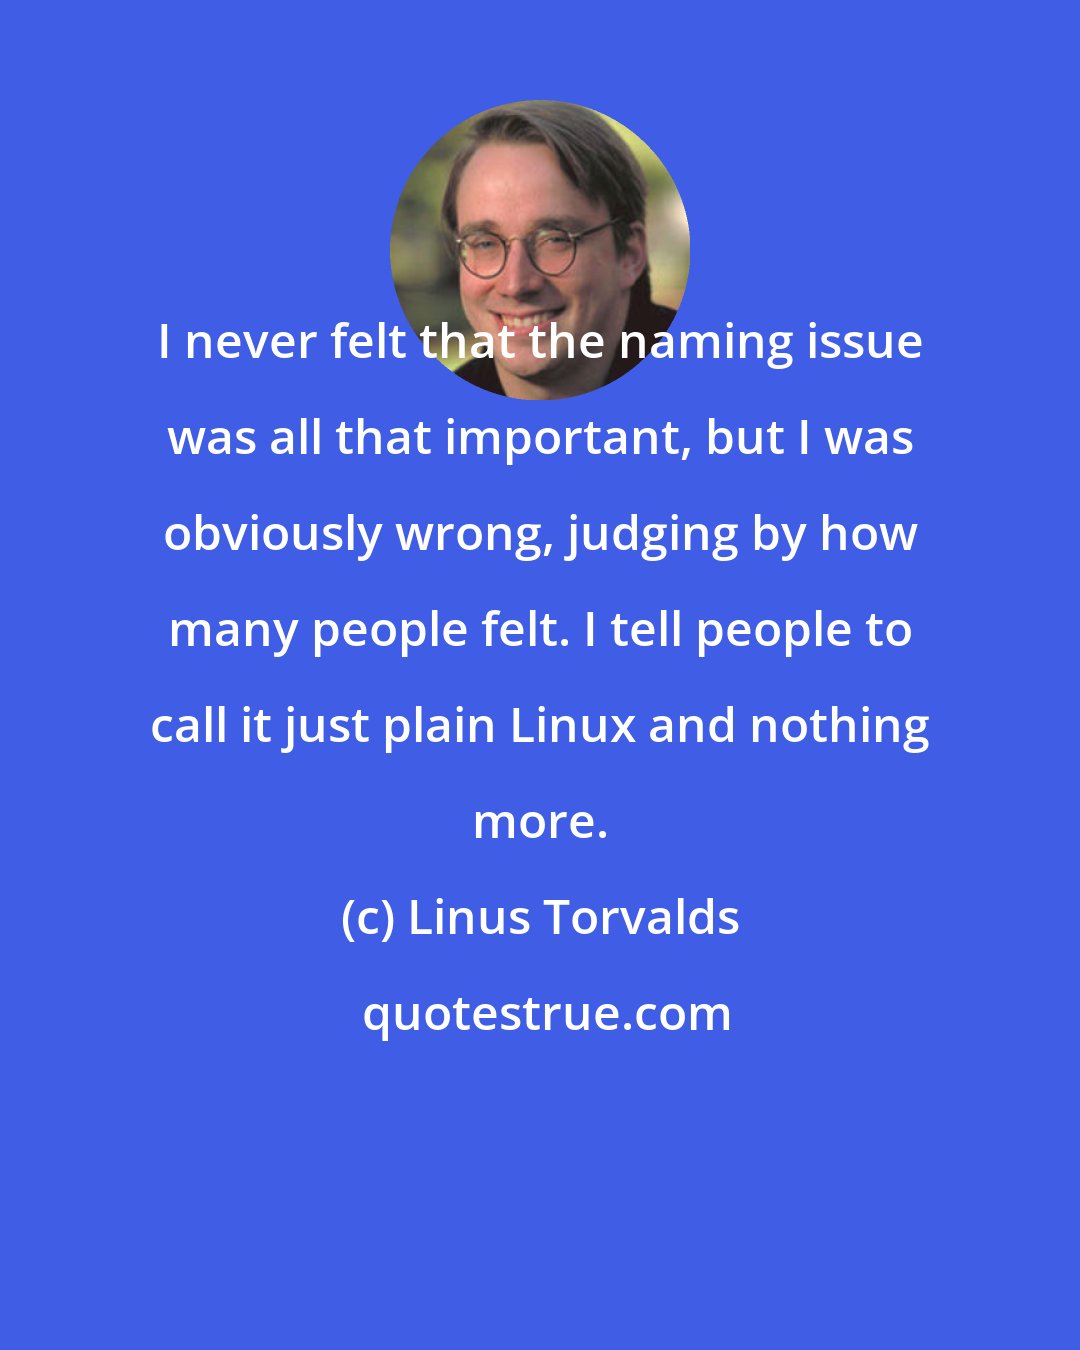 Linus Torvalds: I never felt that the naming issue was all that important, but I was obviously wrong, judging by how many people felt. I tell people to call it just plain Linux and nothing more.